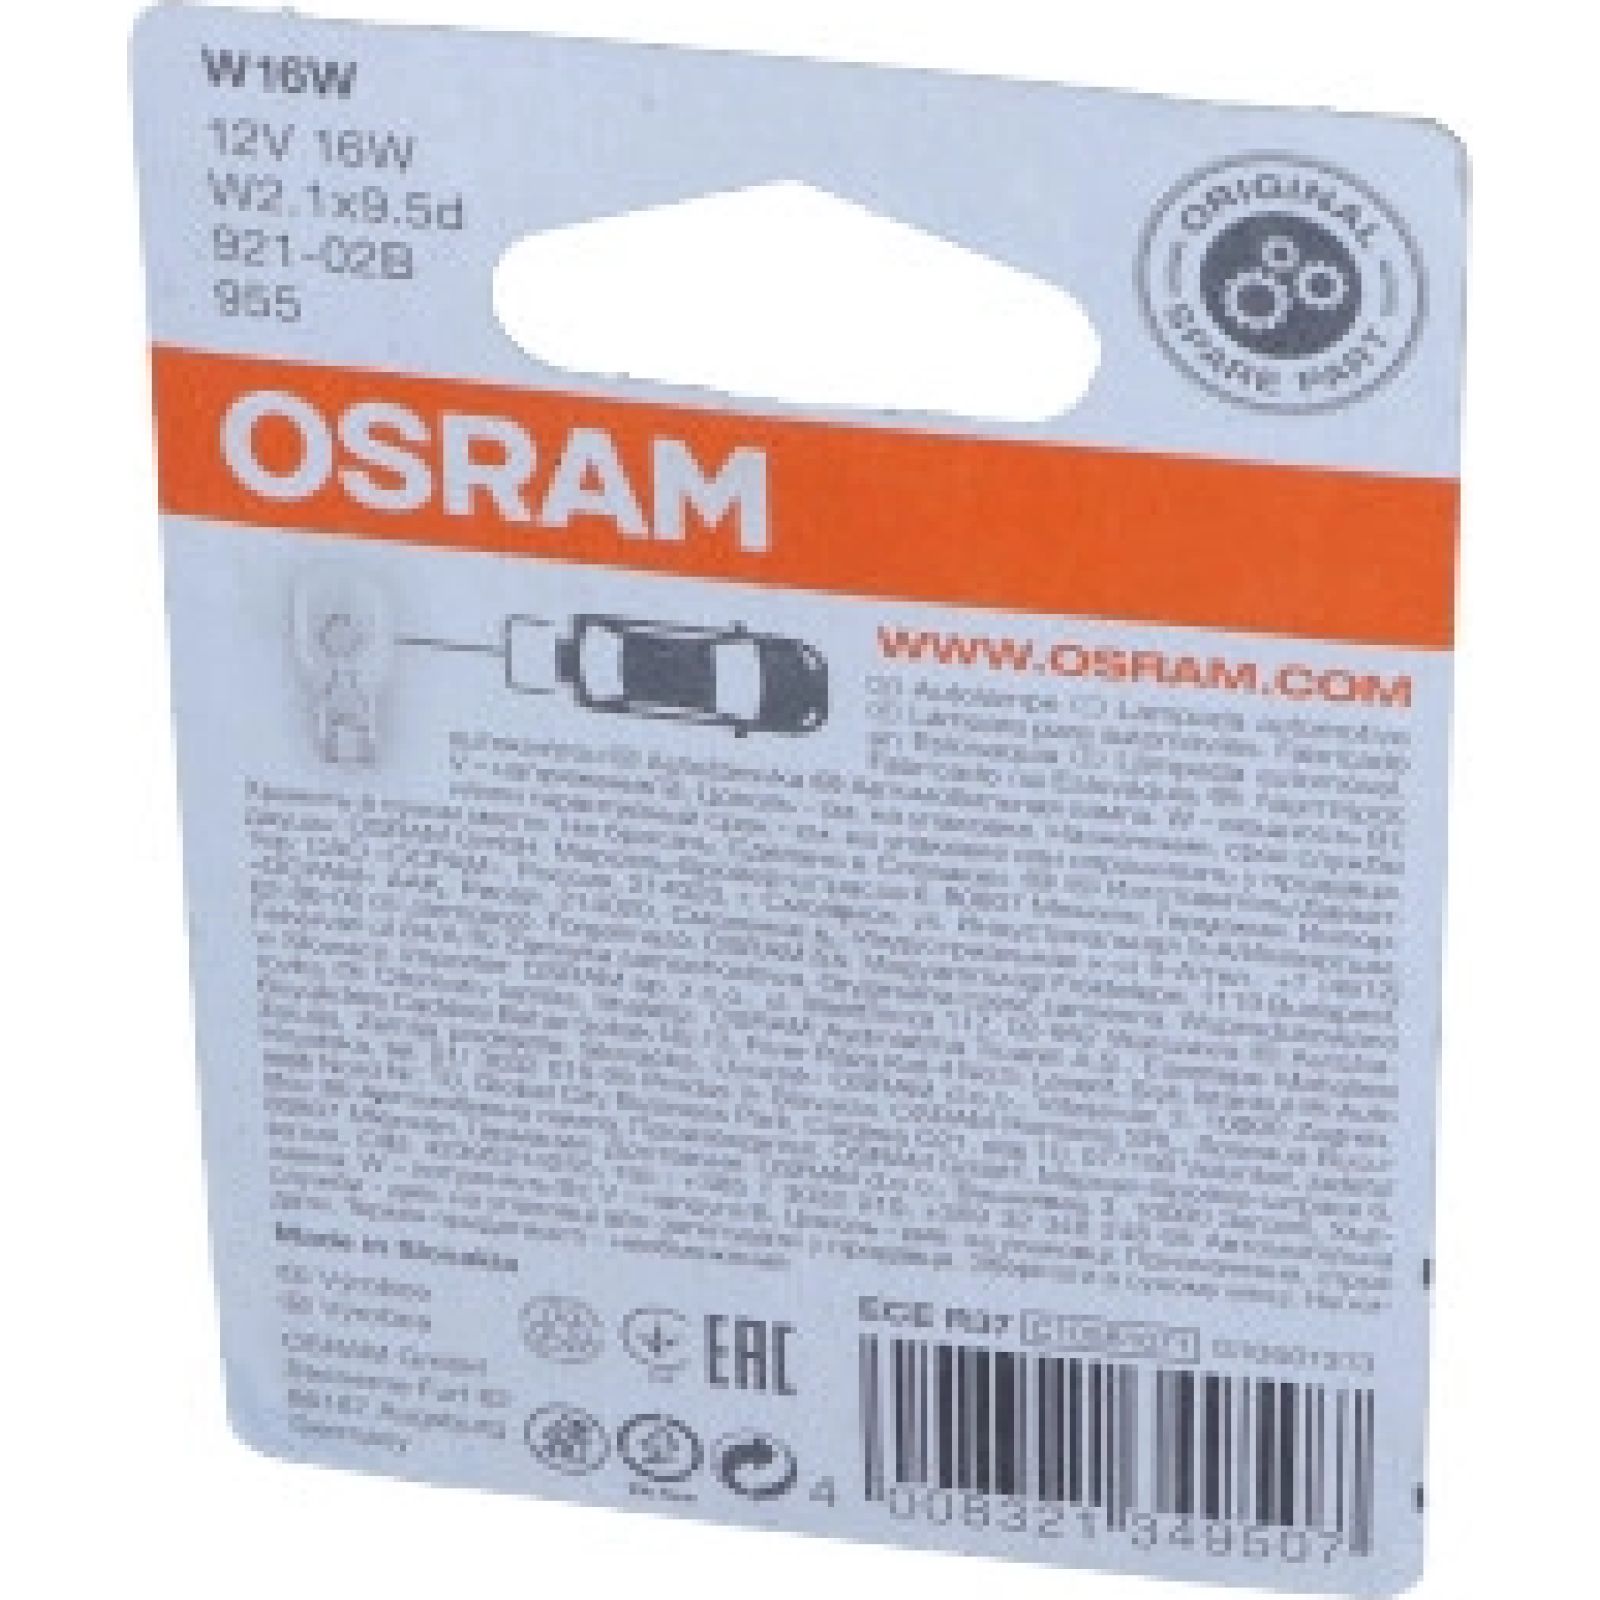 https://www.autoteile-store.at/img/product/w16w-osram-12v-16w-w21x95d-original-921-02b-200131/77a53f5b95fda06b5e916608417174c4_1600.jpg